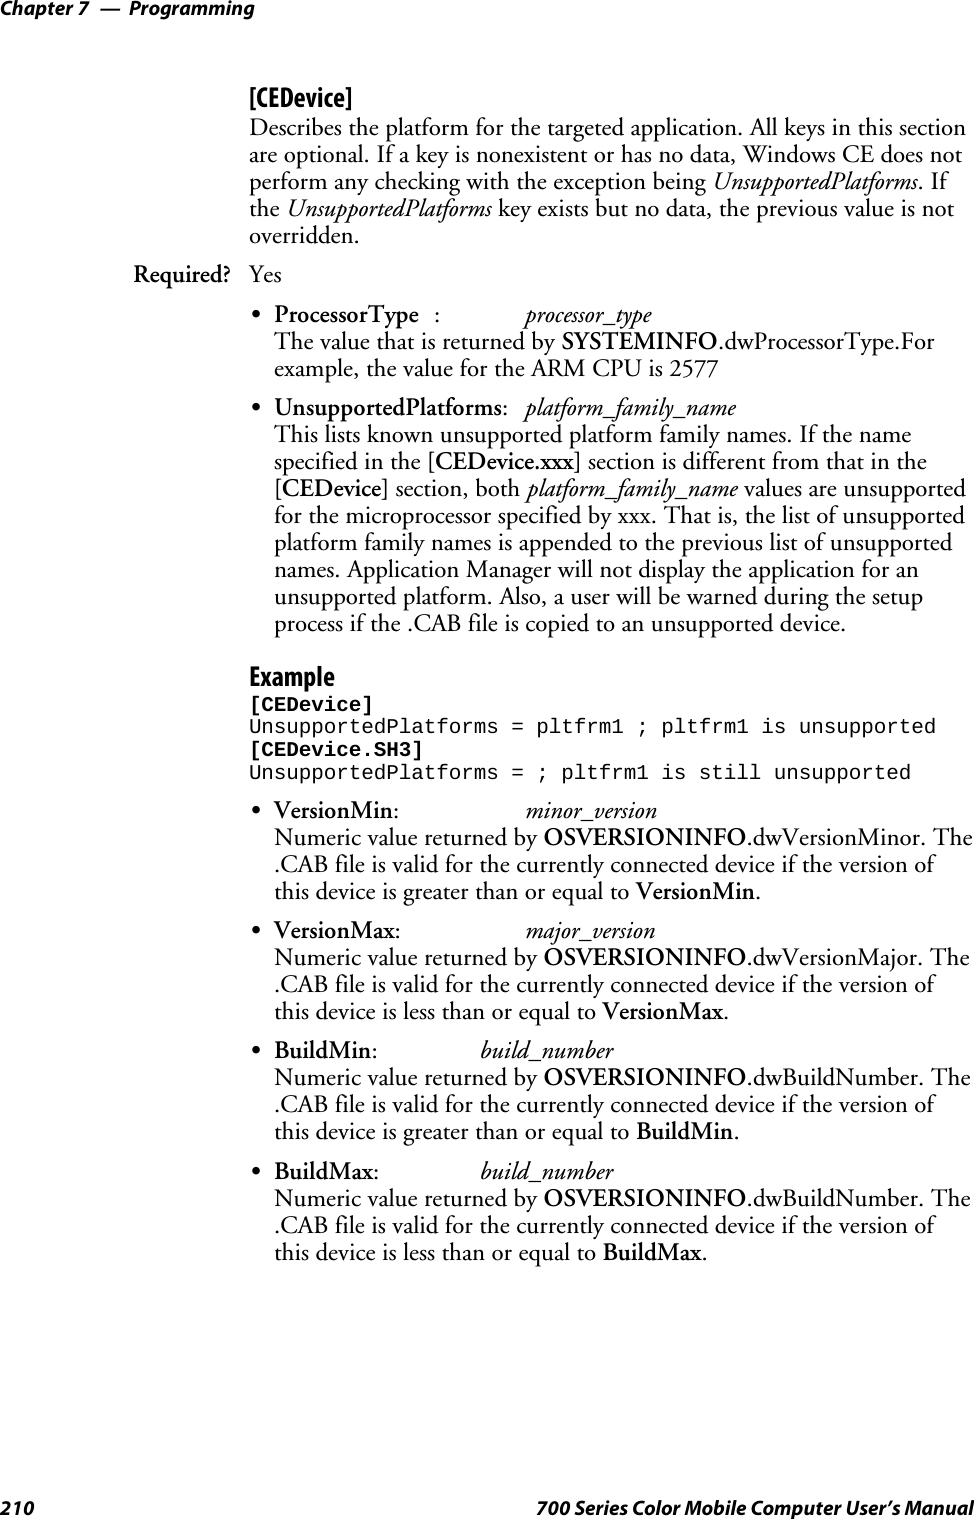 ProgrammingChapter —7210 700 Series Color Mobile Computer User’s Manual[CEDevice]Describes the platform for the targeted application. All keys in this sectionare optional. If a key is nonexistent or has no data, Windows CE does notperform any checking with the exception being UnsupportedPlatforms.Ifthe UnsupportedPlatforms key exists but no data, the previous value is notoverridden.Required? YesSProcessorType :processor_typeThe value that is returned by SYSTEMINFO.dwProcessorType.Forexample, the value for the ARM CPU is 2577SUnsupportedPlatforms:platform_family_nameThis lists known unsupported platform family names. If the namespecified in the [CEDevice.xxx] section is different from that in the[CEDevice] section, both platform_family_name values are unsupportedfor the microprocessor specified by xxx. That is, the list of unsupportedplatform family names is appended to the previous list of unsupportednames. Application Manager will not display the application for anunsupported platform. Also, a user will be warned during the setupprocess if the .CAB file is copied to an unsupported device.Example[CEDevice]UnsupportedPlatforms = pltfrm1 ; pltfrm1 is unsupported[CEDevice.SH3]UnsupportedPlatforms = ; pltfrm1 is still unsupportedSVersionMin:minor_versionNumeric value returned by OSVERSIONINFO.dwVersionMinor. The.CAB file is valid for the currently connected device if the version ofthis device is greater than or equal to VersionMin.SVersionMax:major_versionNumeric value returned by OSVERSIONINFO.dwVersionMajor. The.CAB file is valid for the currently connected device if the version ofthis device is less than or equal to VersionMax.SBuildMin:build_numberNumeric value returned by OSVERSIONINFO.dwBuildNumber. The.CAB file is valid for the currently connected device if the version ofthis device is greater than or equal to BuildMin.SBuildMax:build_numberNumeric value returned by OSVERSIONINFO.dwBuildNumber. The.CAB file is valid for the currently connected device if the version ofthis device is less than or equal to BuildMax.